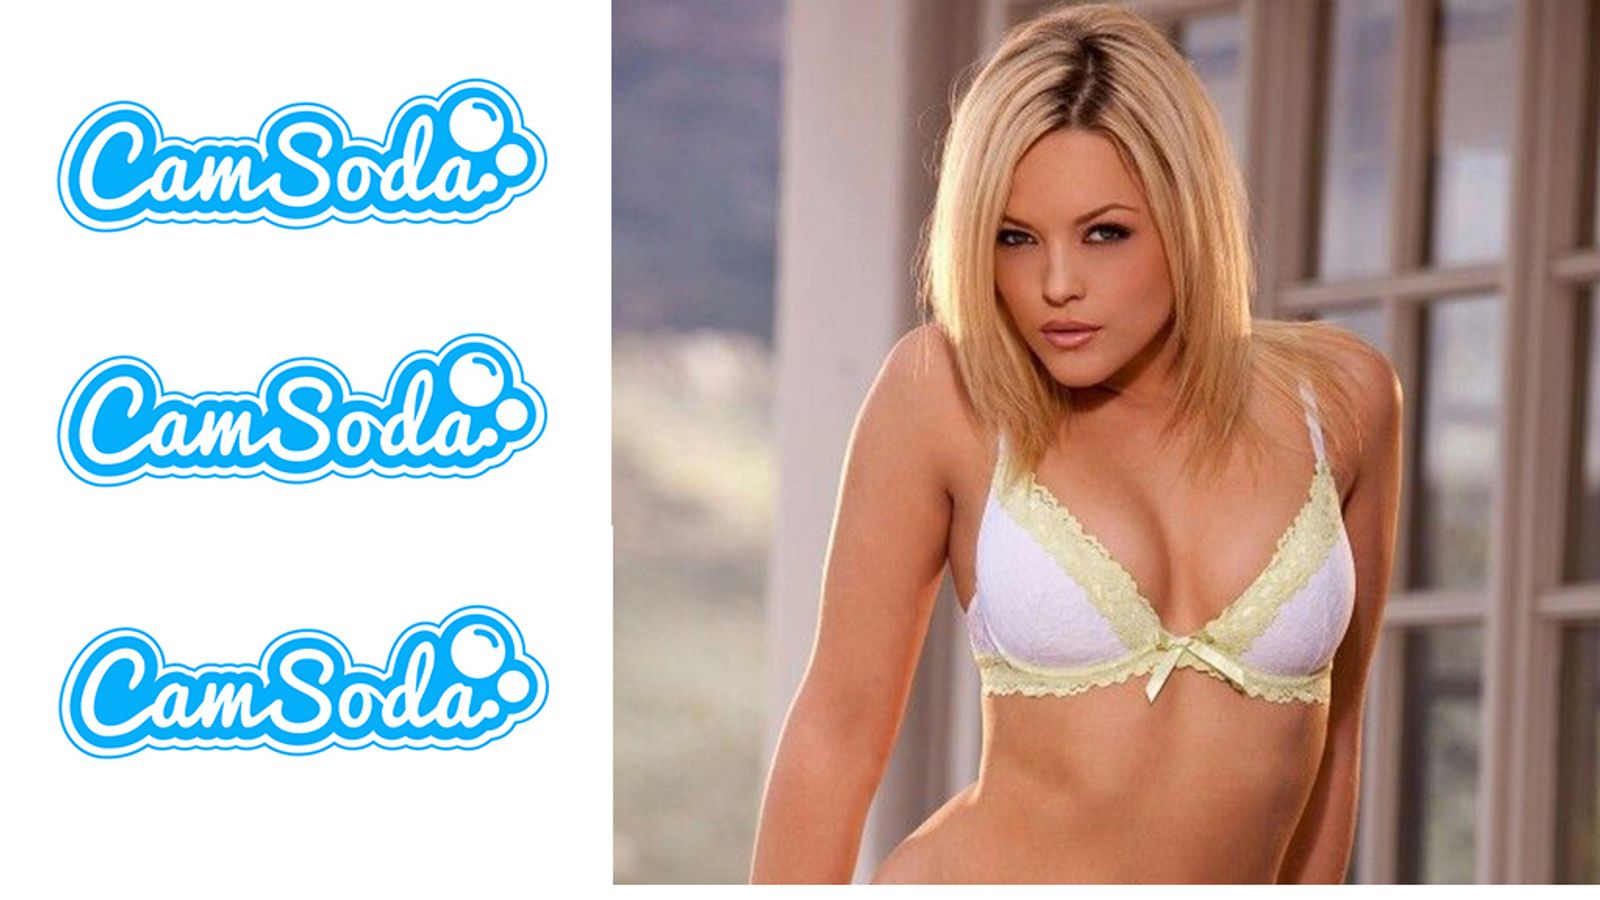 Alexis Texas to Perform For Fans on CamSoda Tonight